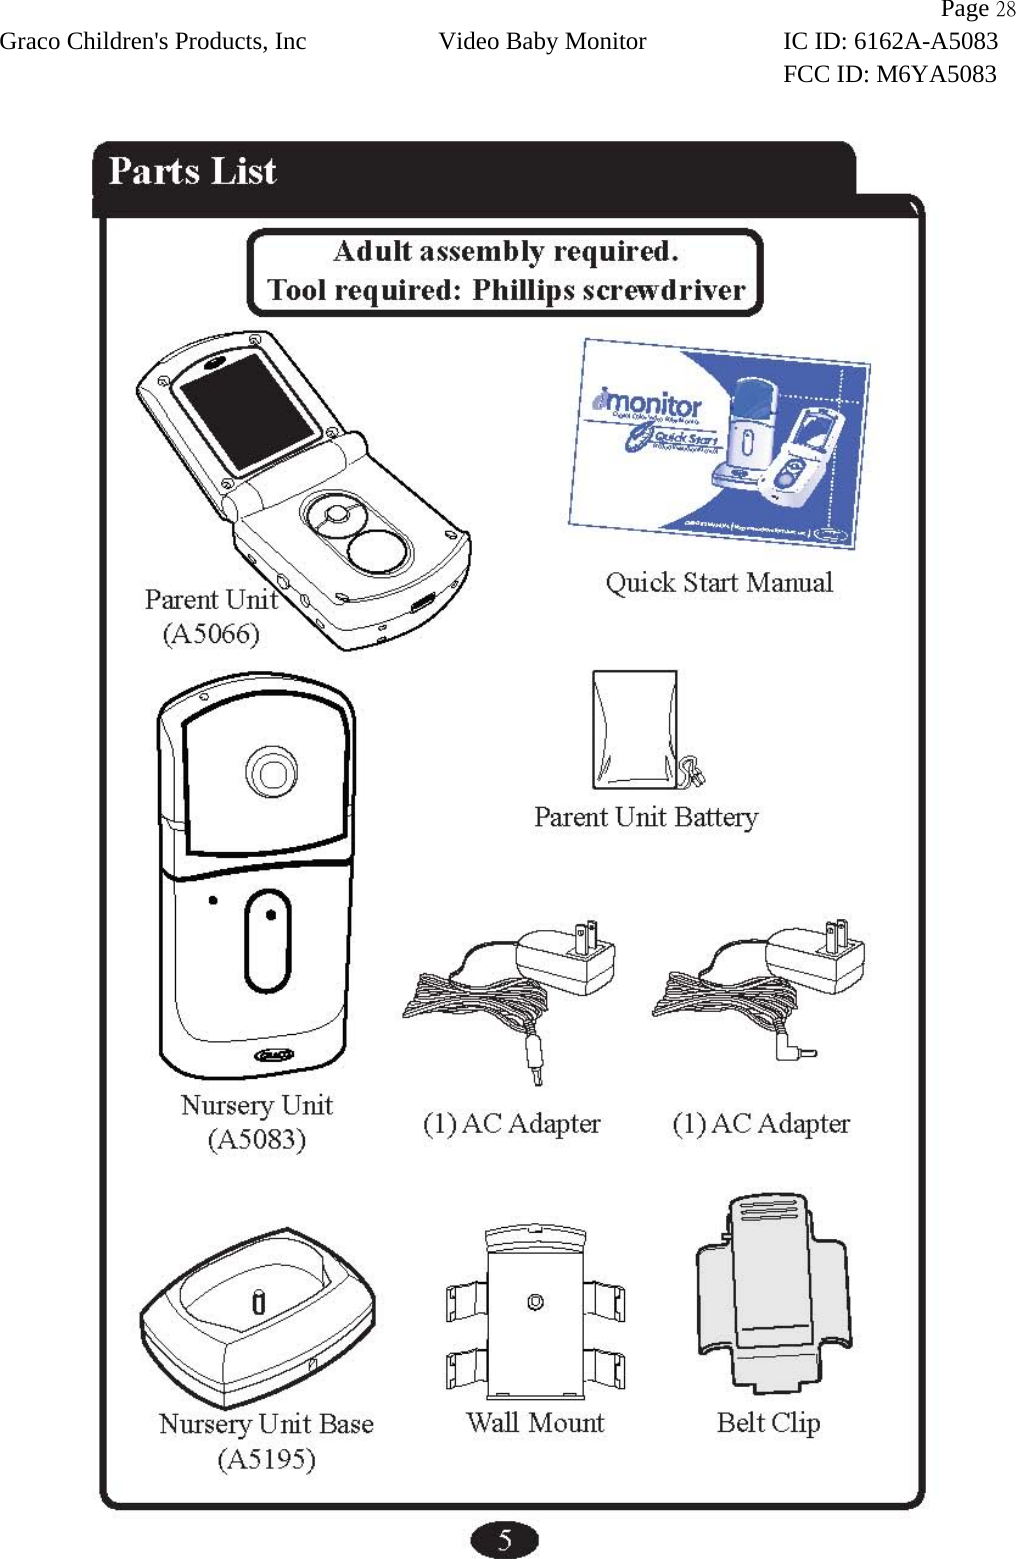                Page 28 Graco Children&apos;s Products, Inc Video Baby Monitor IC ID: 6162A-A5083 FCC ID: M6YA5083   